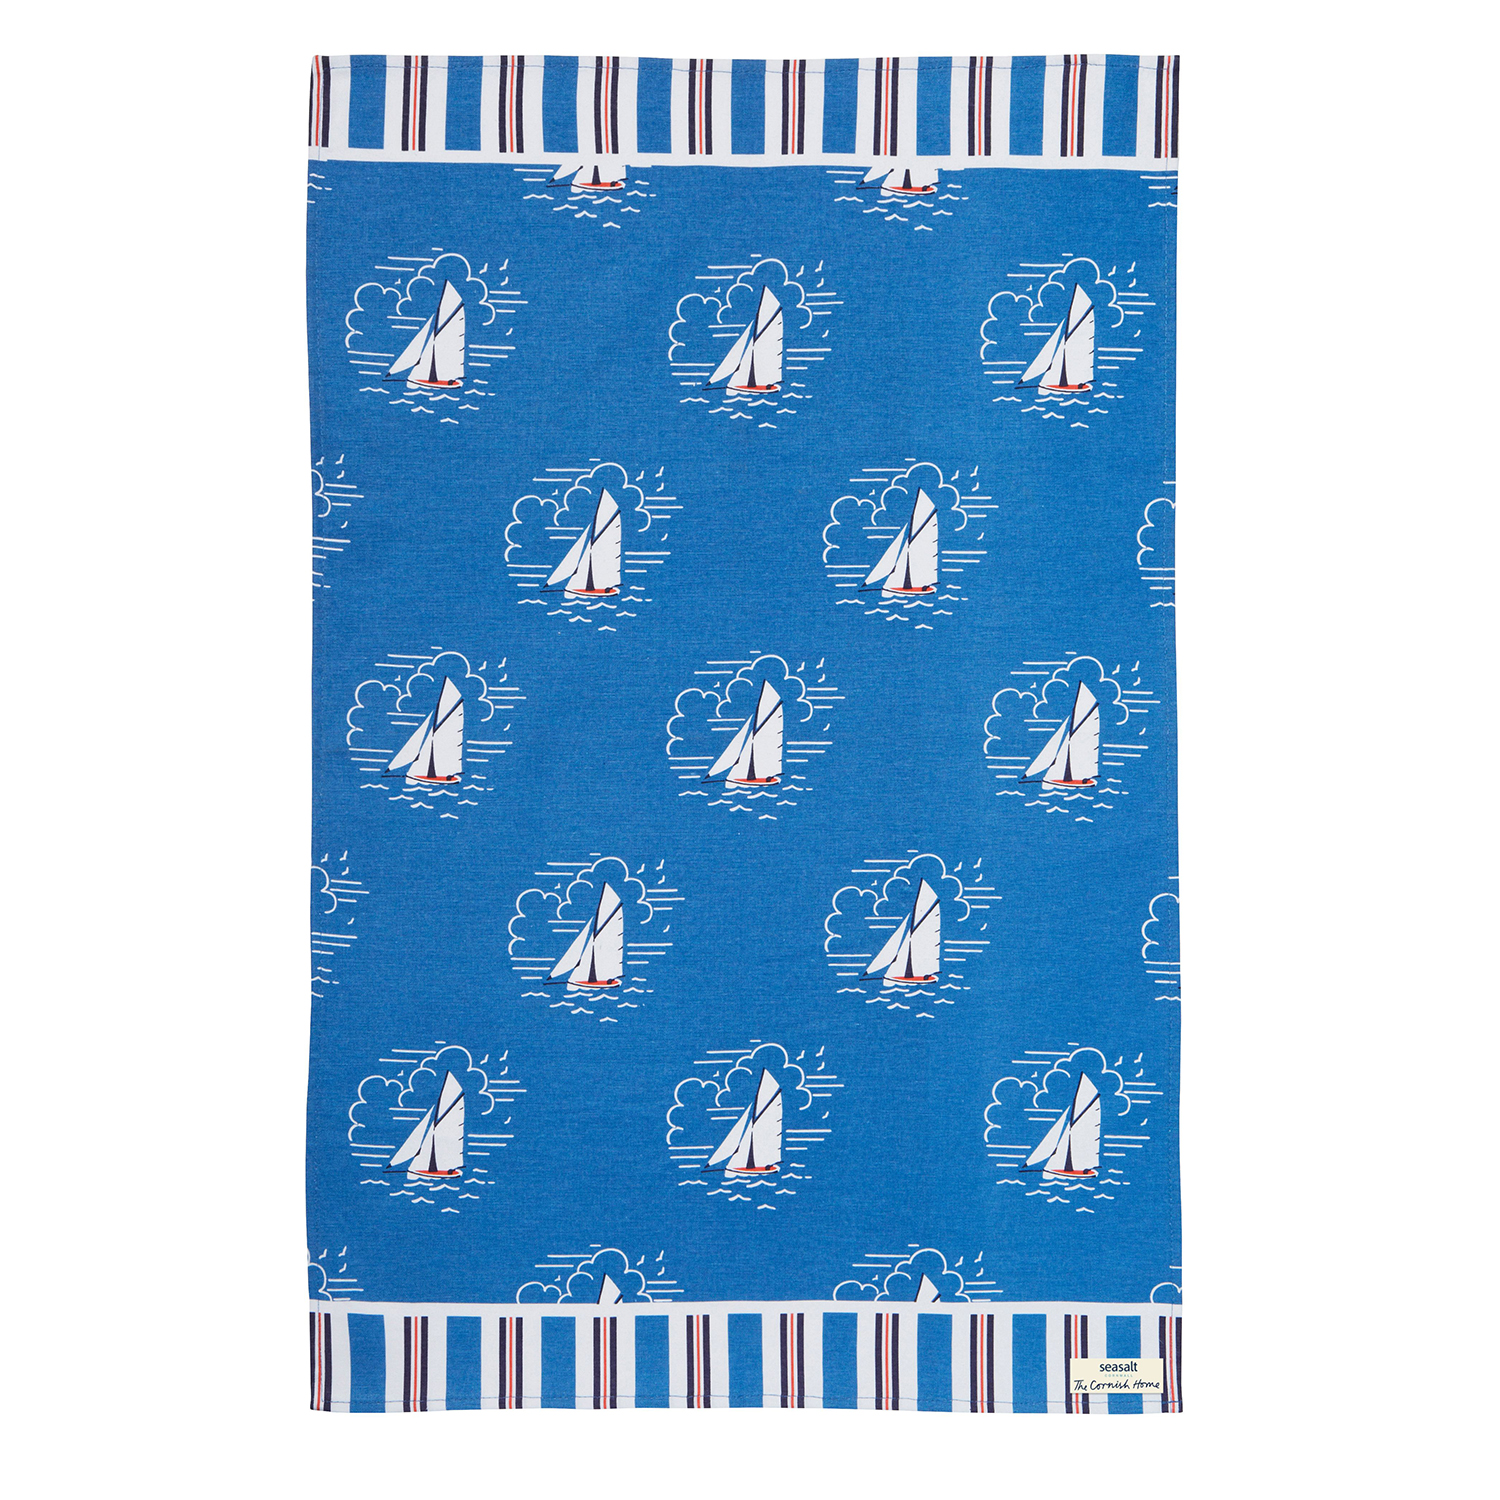 Cotton Tea Towel by Seasalt - The Seas in the Kitchen